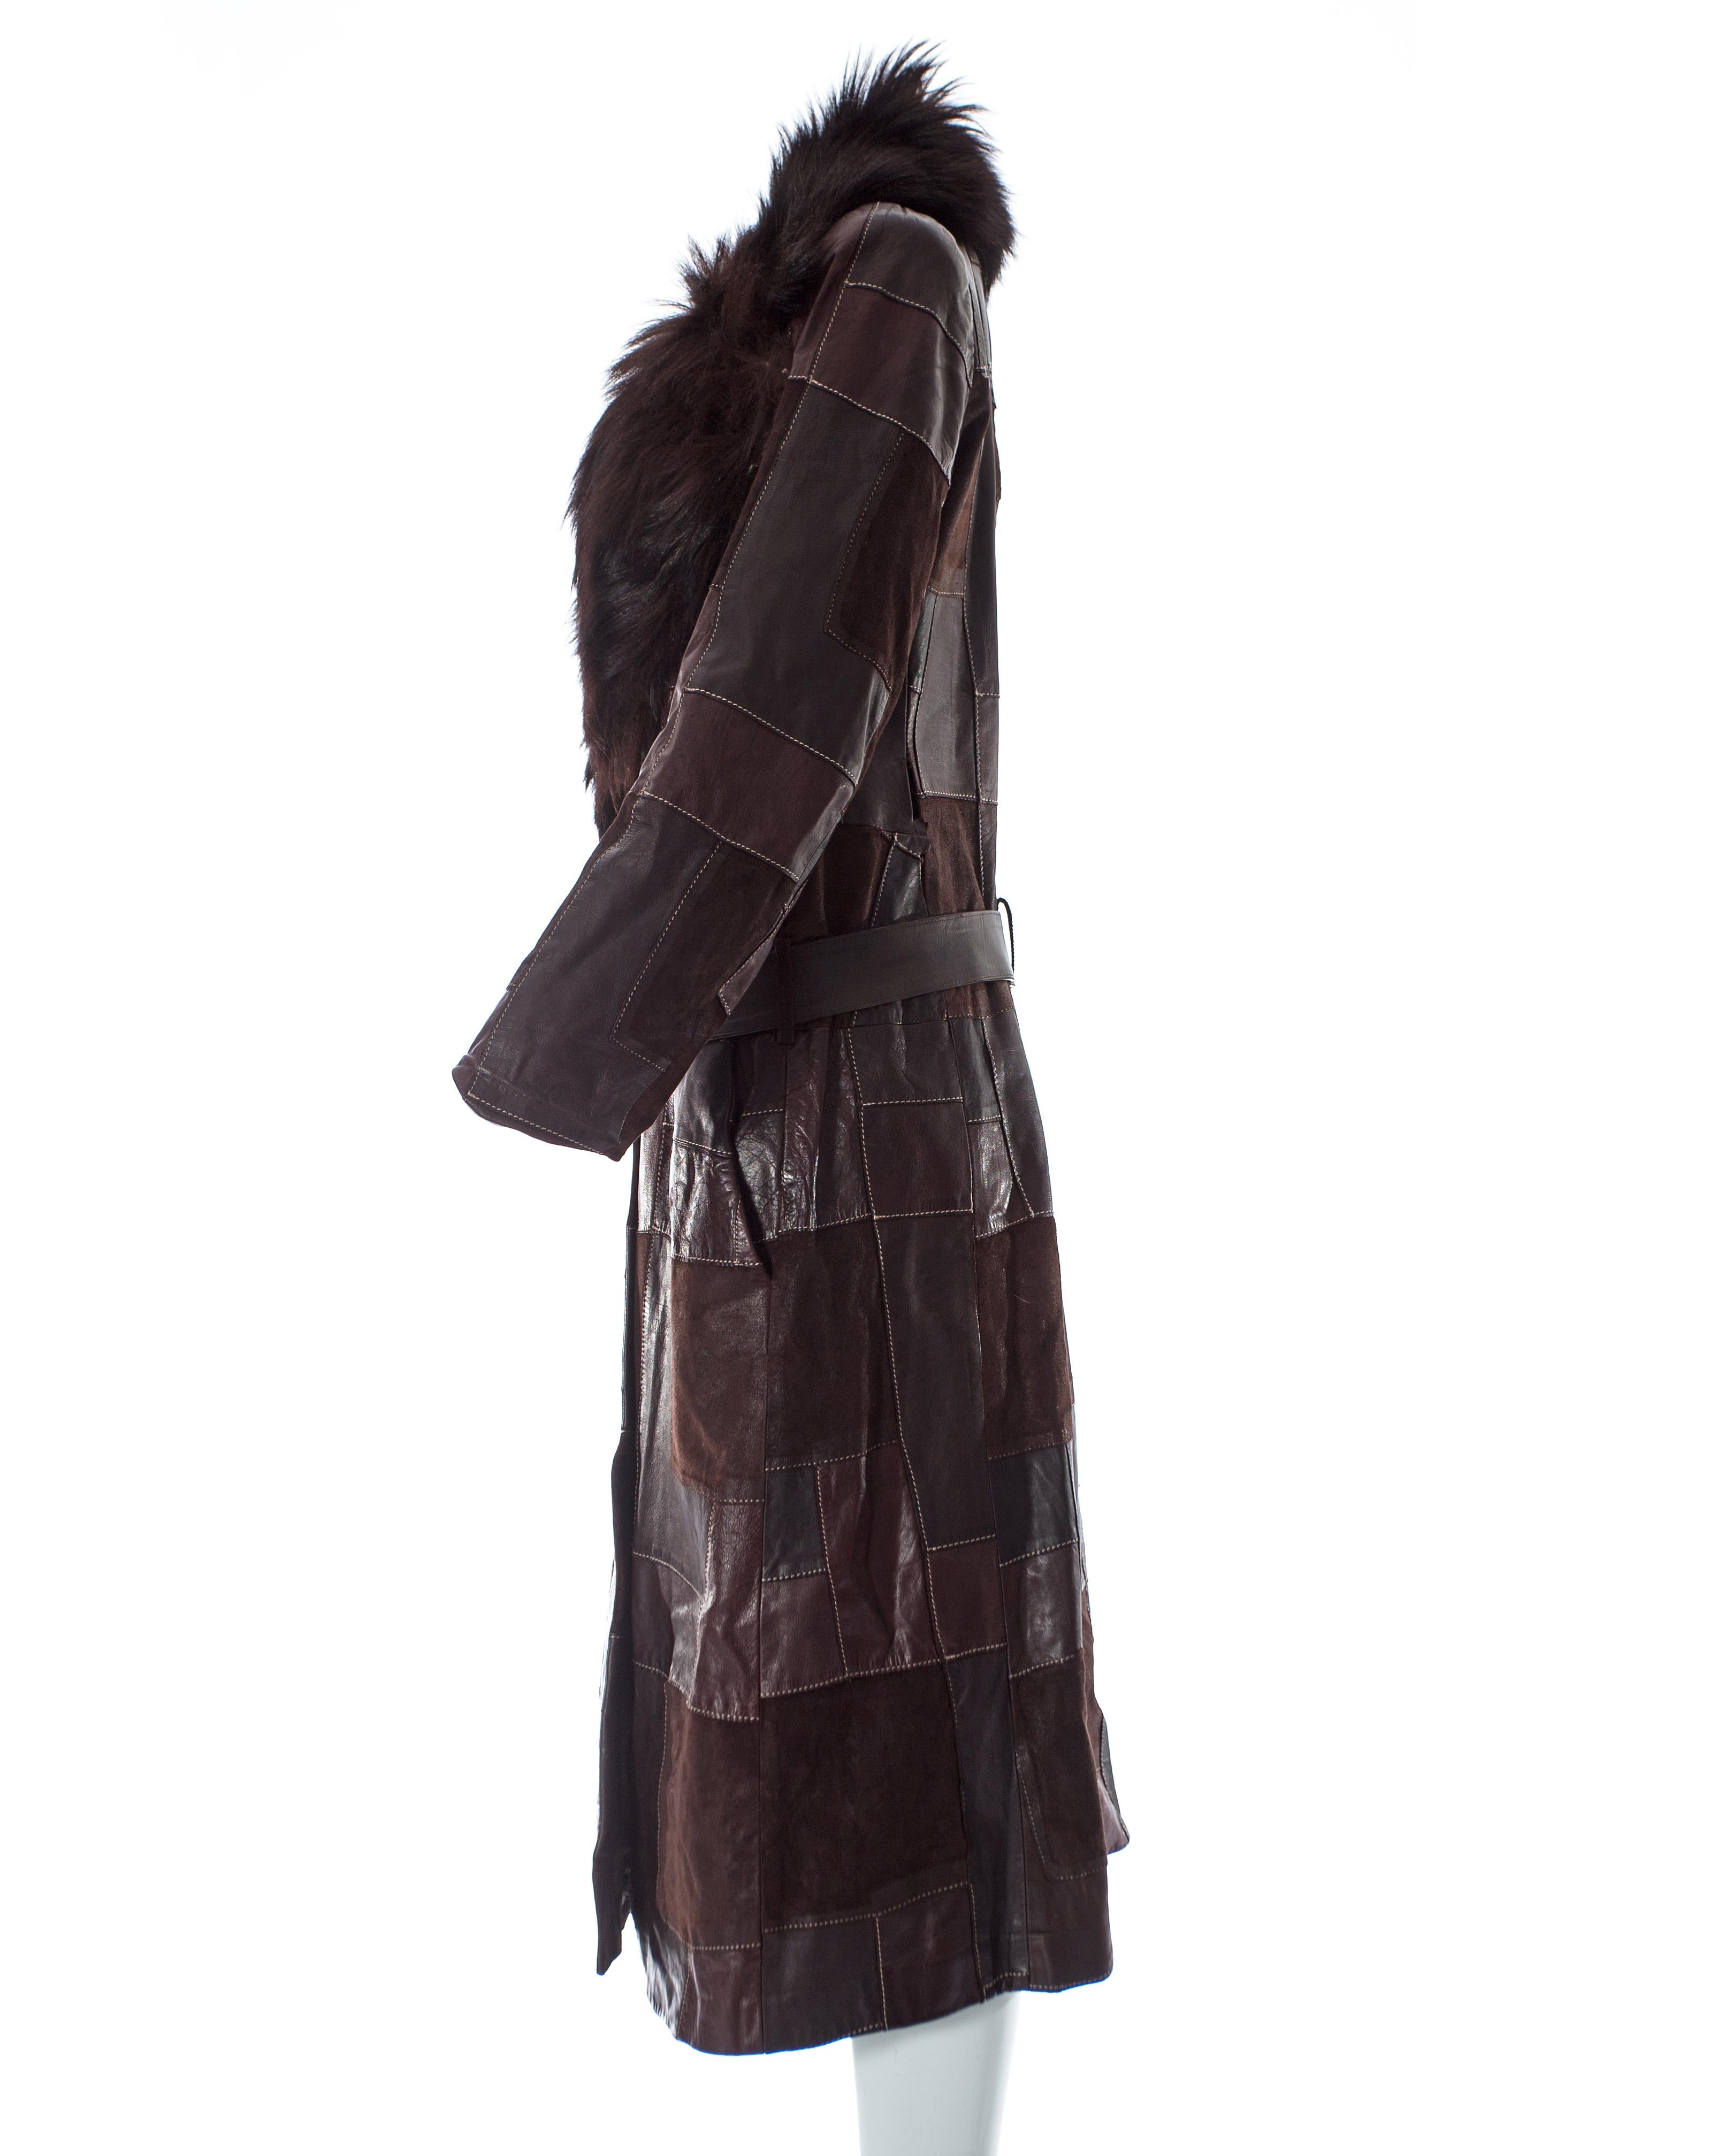 Black Alexander McQueen brown leather patchwork coat with goat hair collar, A / W 2000 For Sale